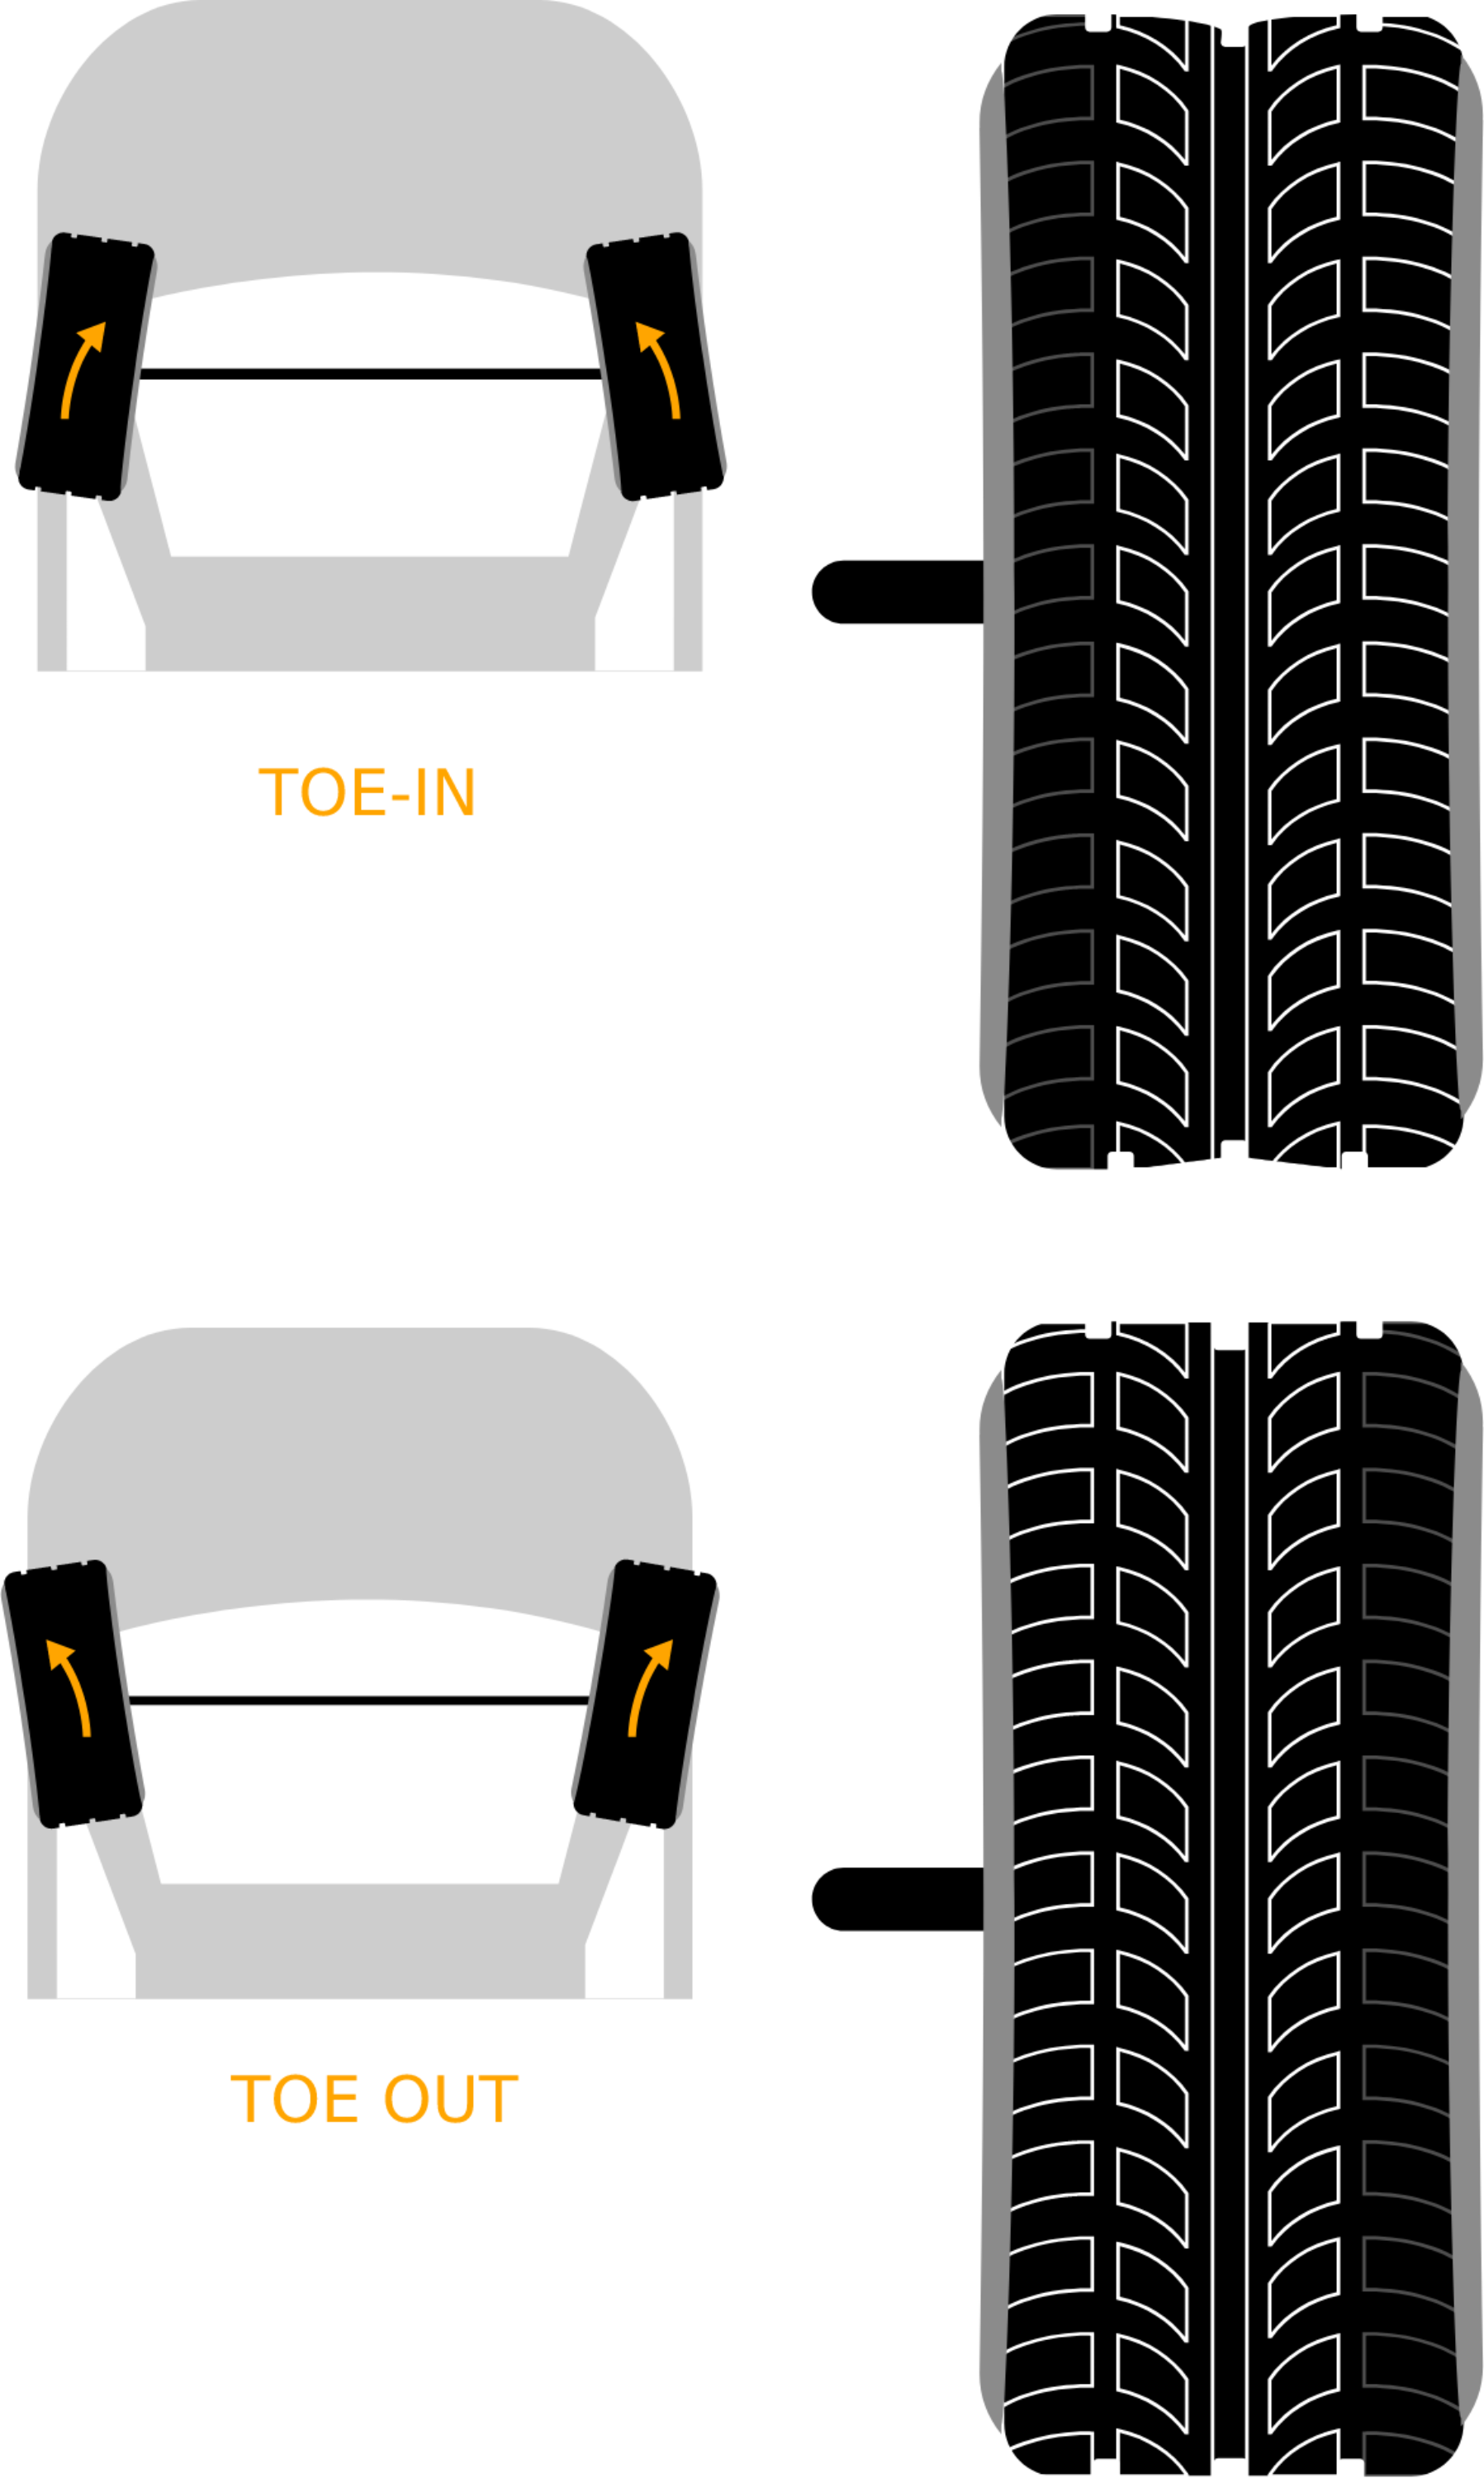 Toe in and toe out are the two types of one sided tire wear.